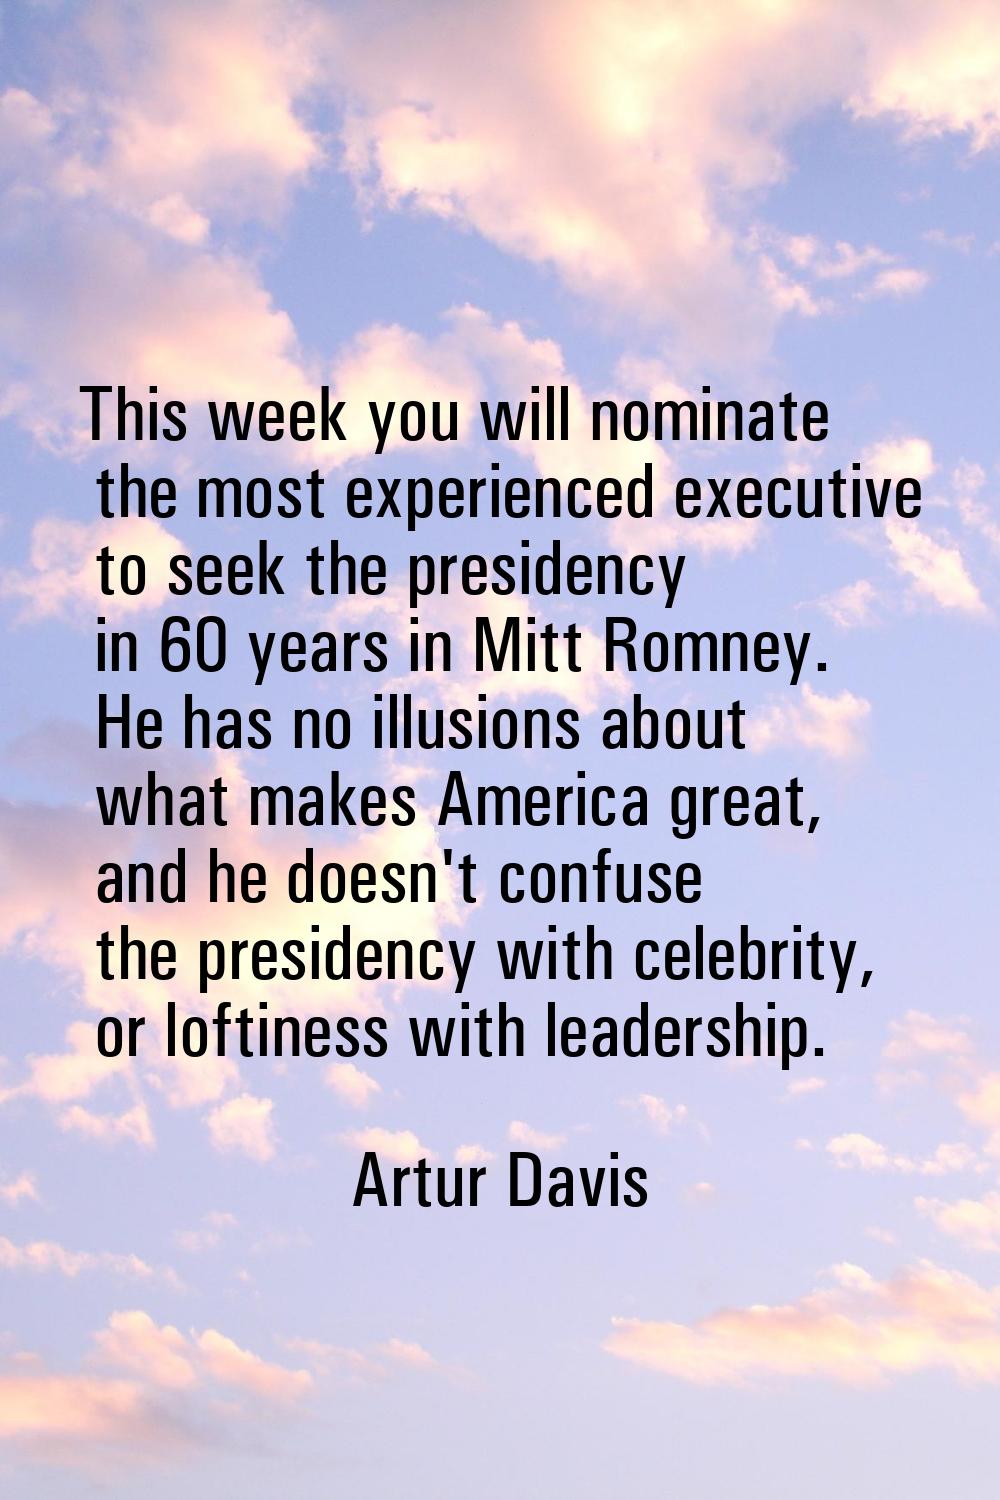 This week you will nominate the most experienced executive to seek the presidency in 60 years in Mi